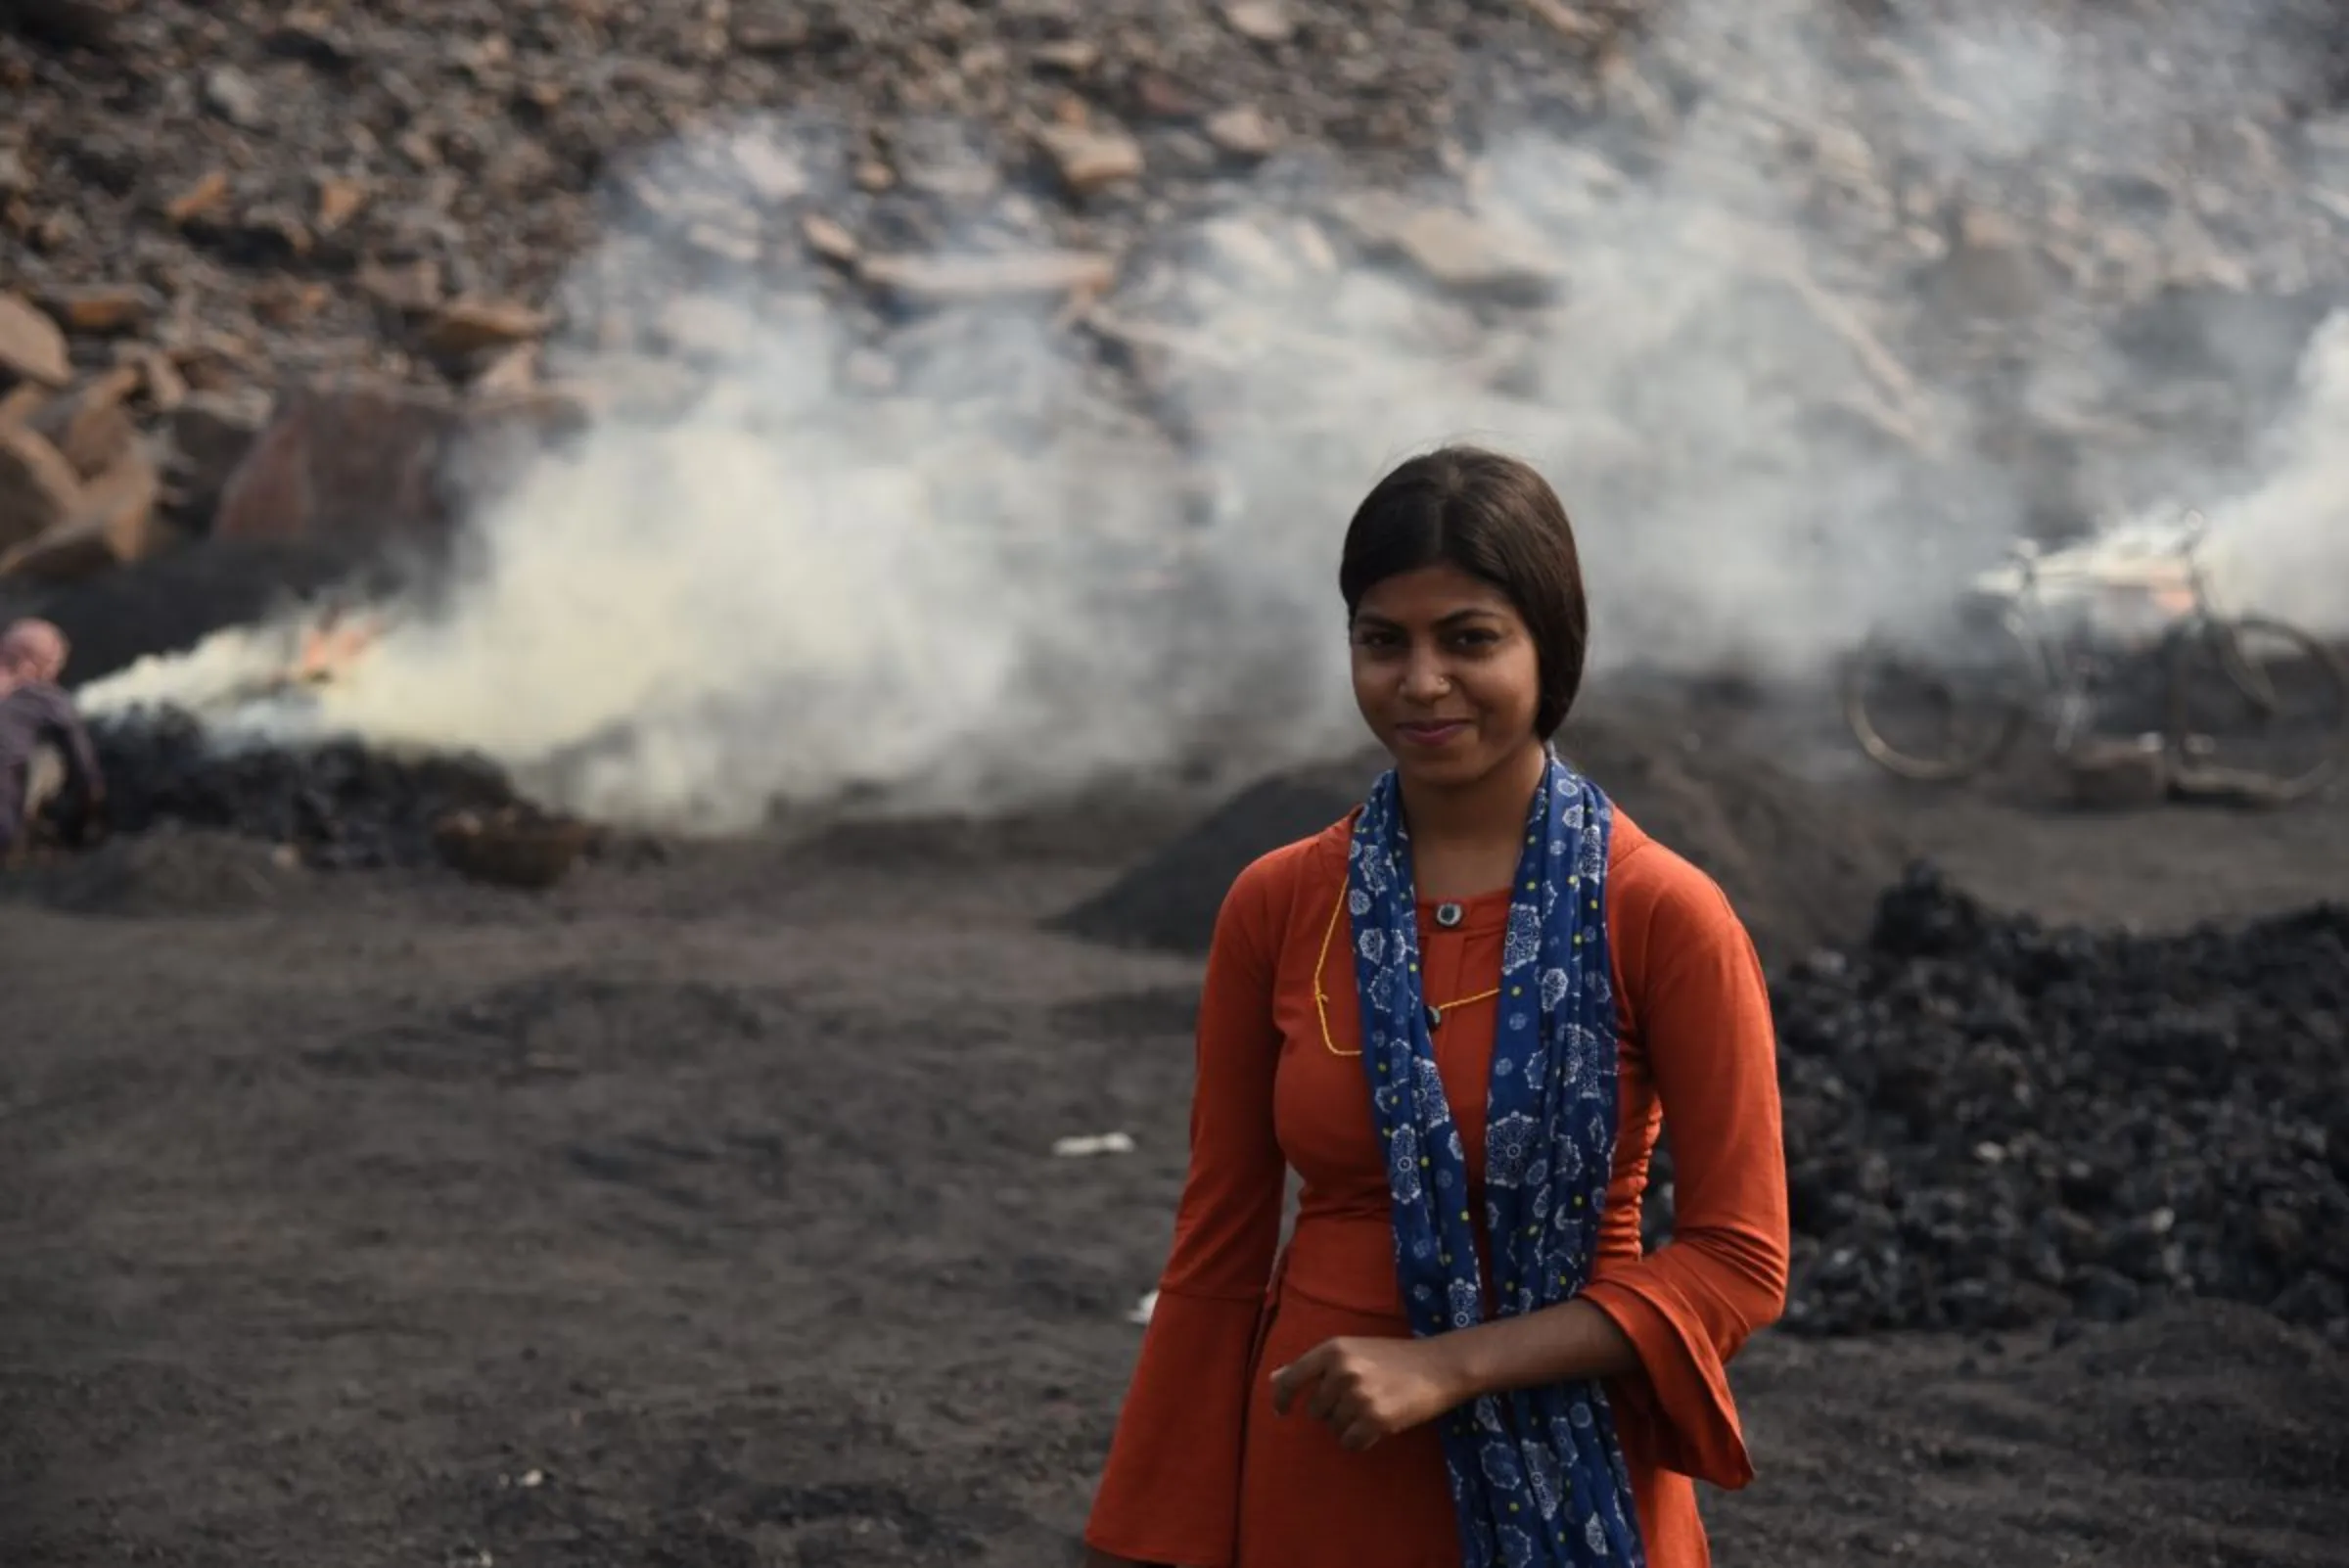 Suman Kumari poses for a picture at a burning coalfield in Jharia, India, November 11, 2022. Thomson Reuters Foundation/Tanmoy Bhaduri